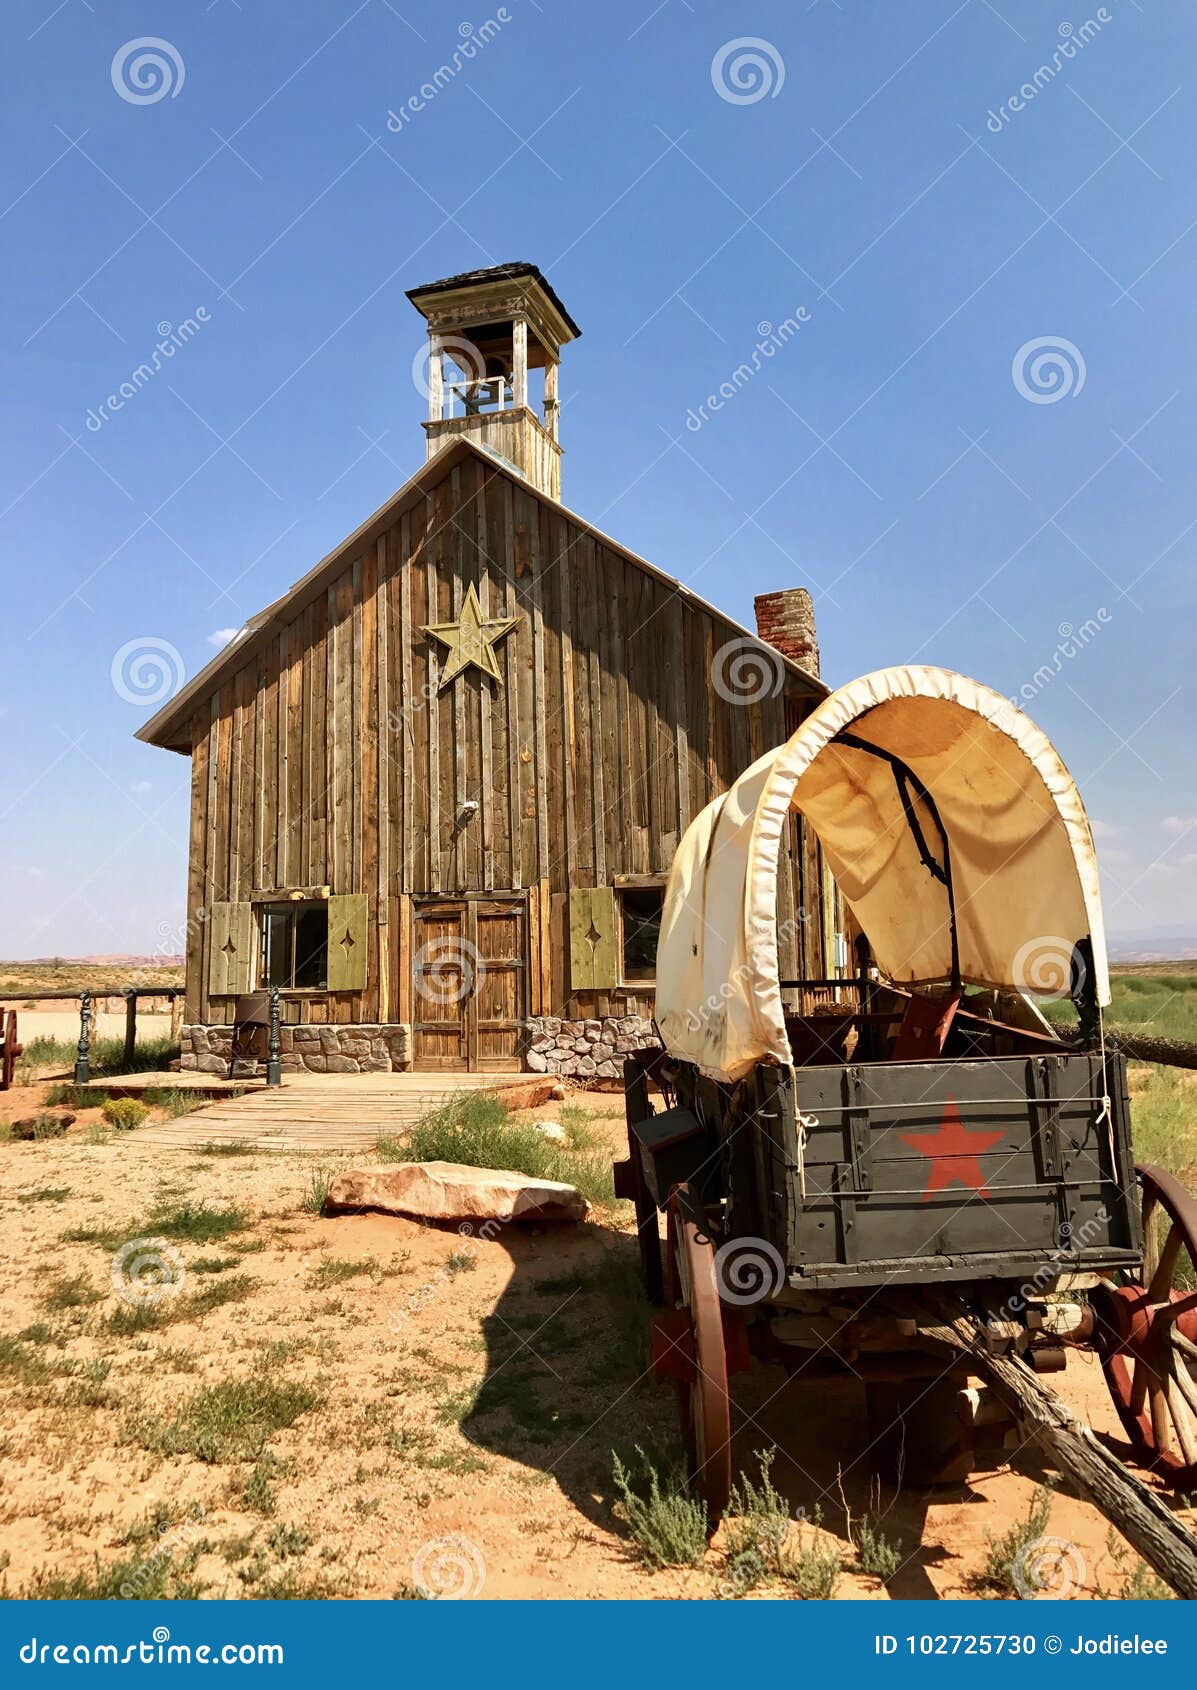 antique covered wagon and settler church in watercolor